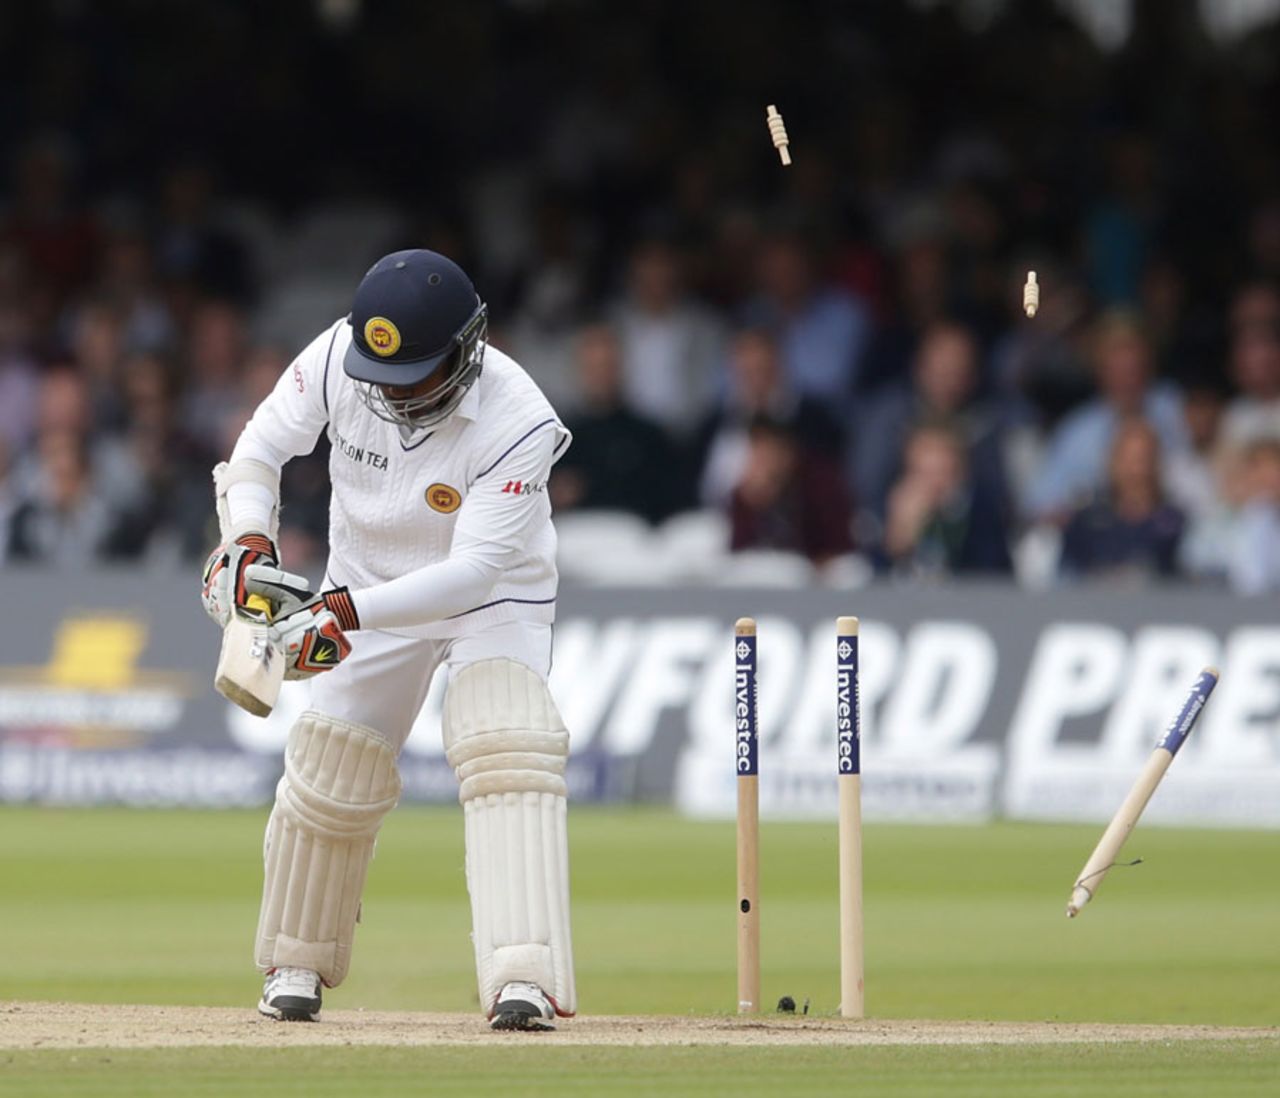 Rangana Herath's stumps were splayed by James Anderson, England v Sri Lanka, 1st Investec Test, Lord's, 4th day, June 15, 2014